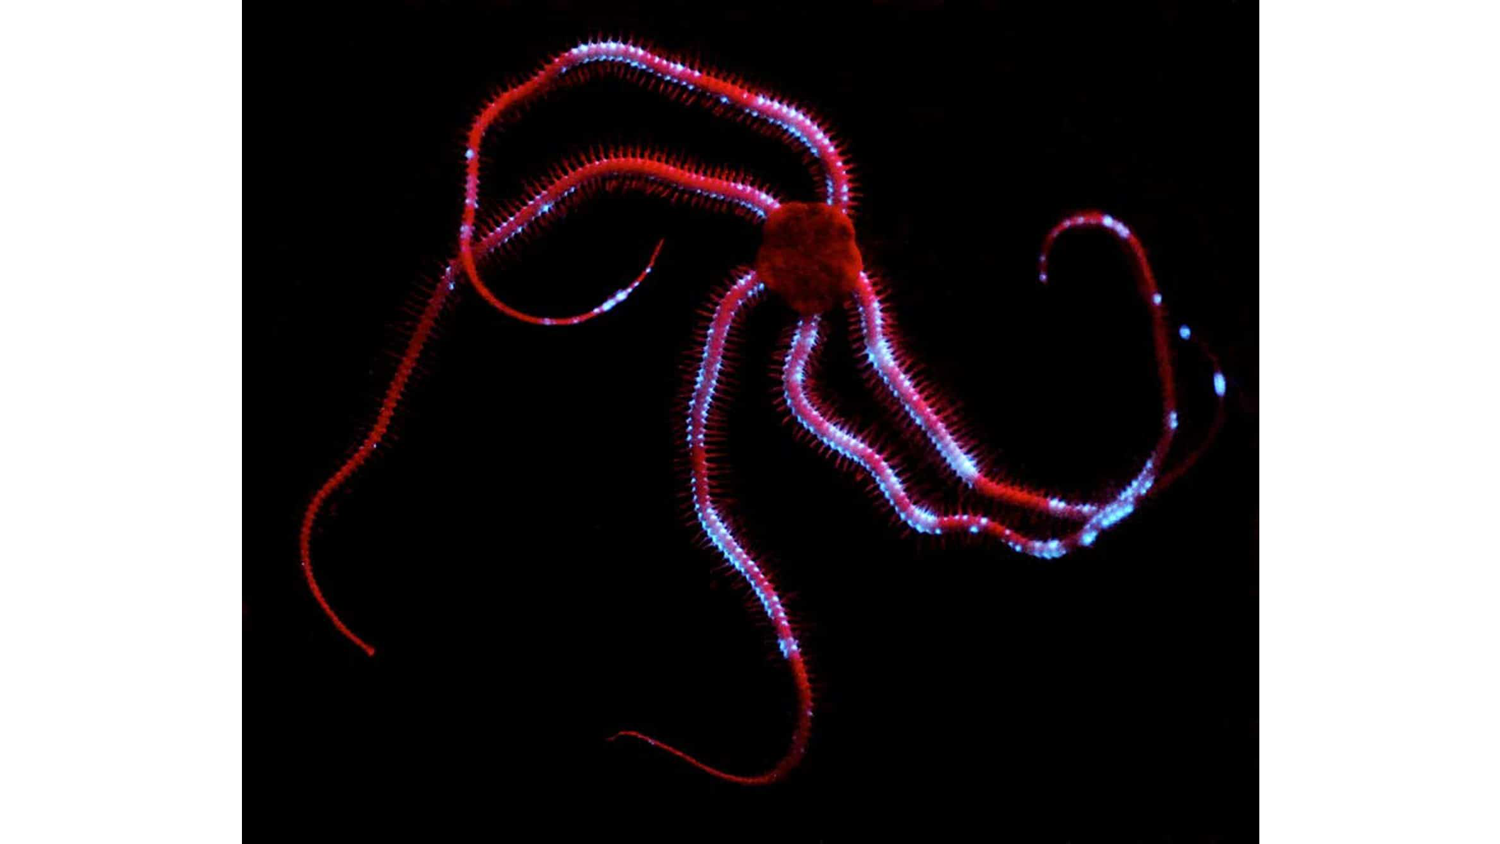 Photograph of a brittle star emitting a blue bioluminescent display